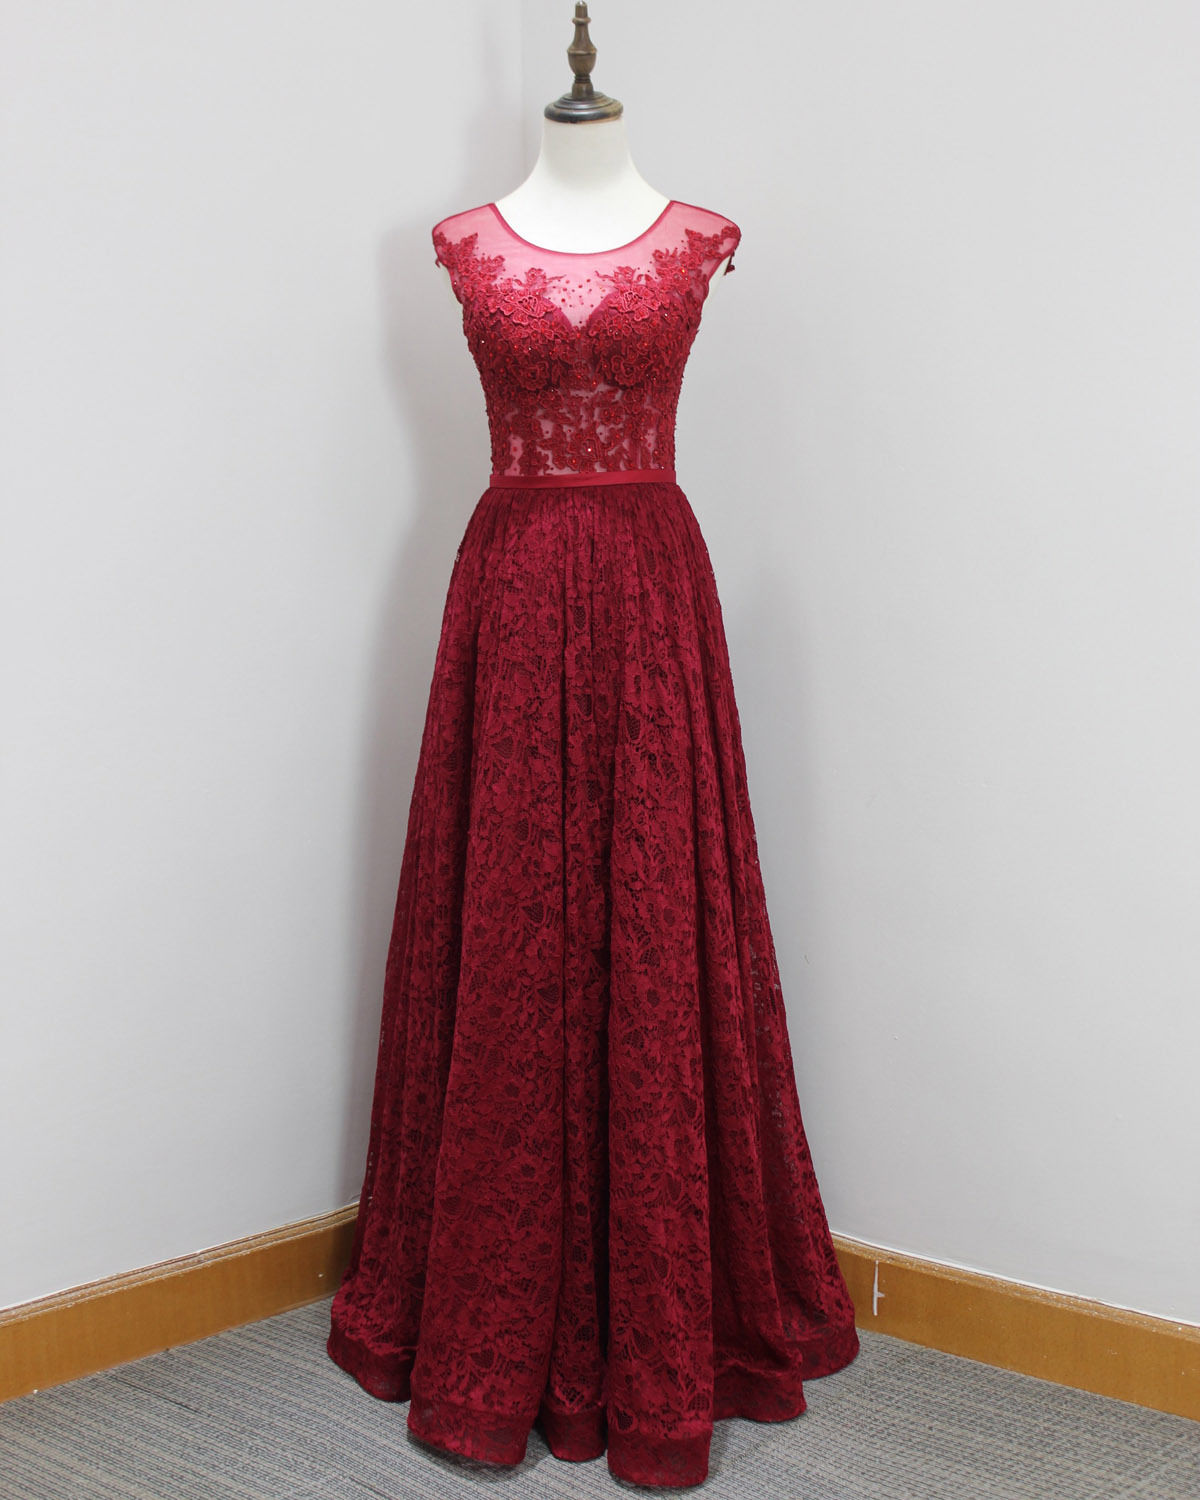 Plus Size Burgundy Lace Prom Dresses 2018 Sexy Sheer Lace Formal Evening Dresses Custom Made Wedding Party Gowns ,off Shoulder Prom Dress,